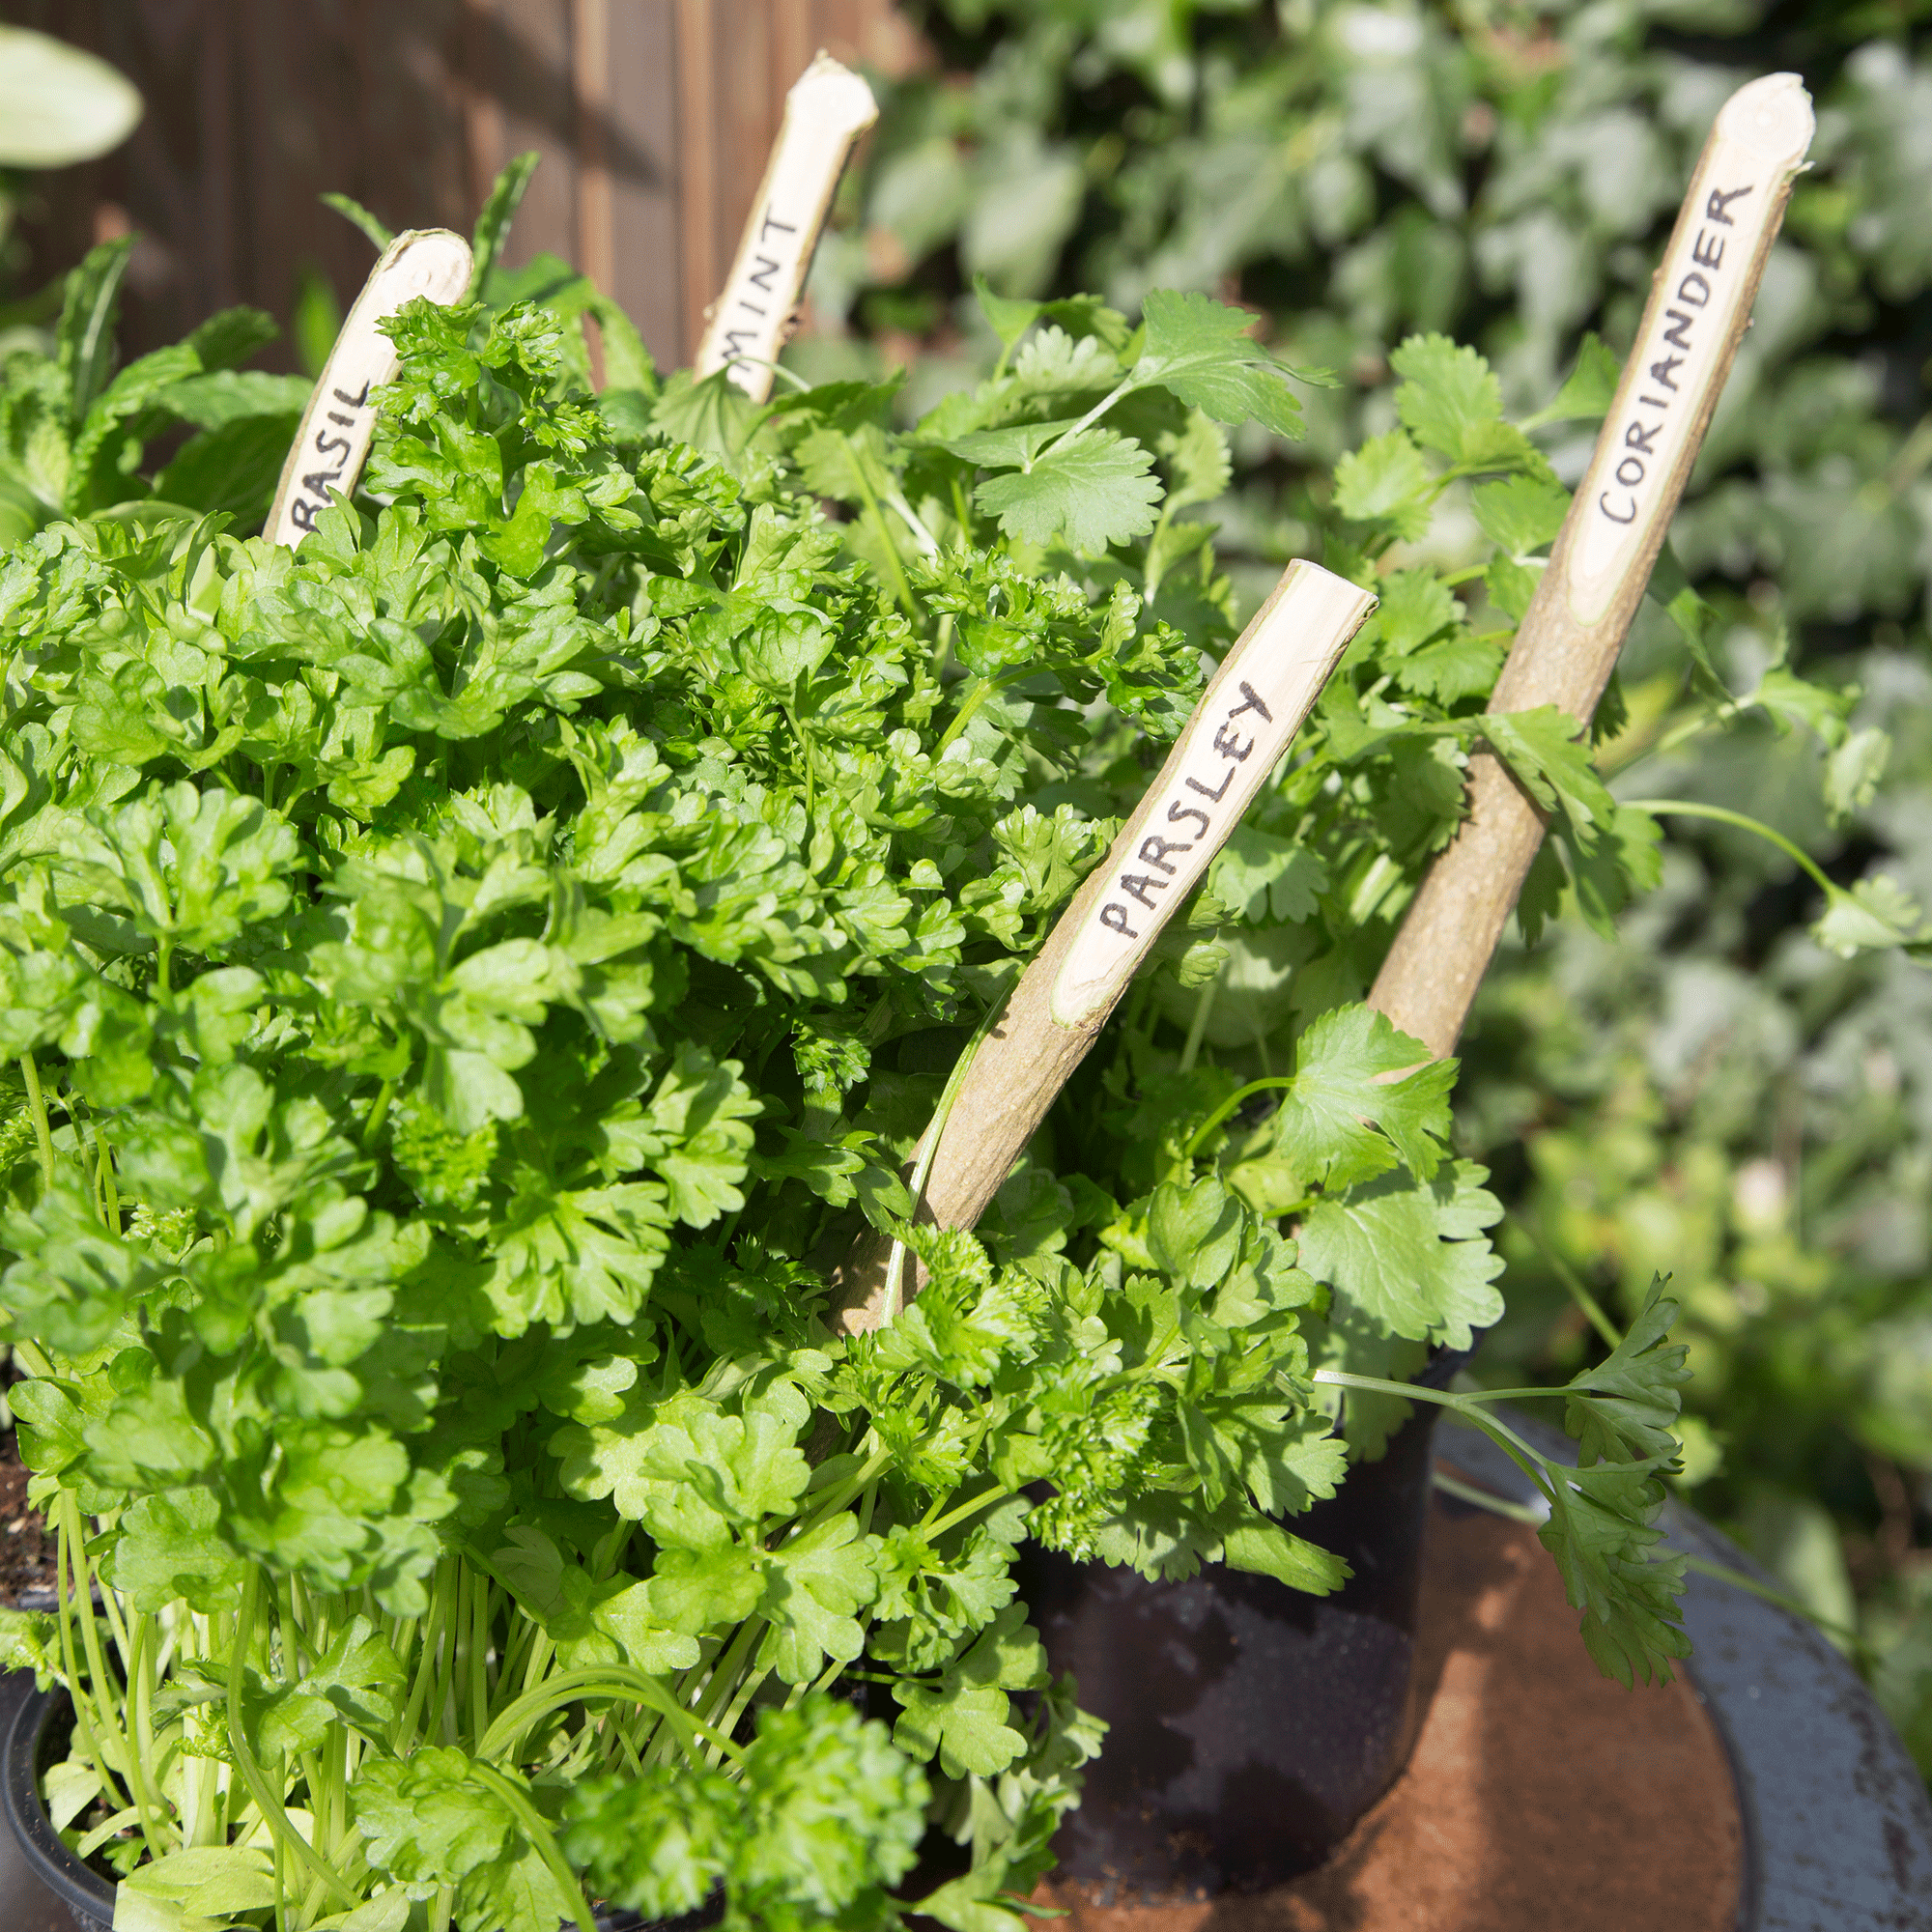 Herbs with lollipop stick markers